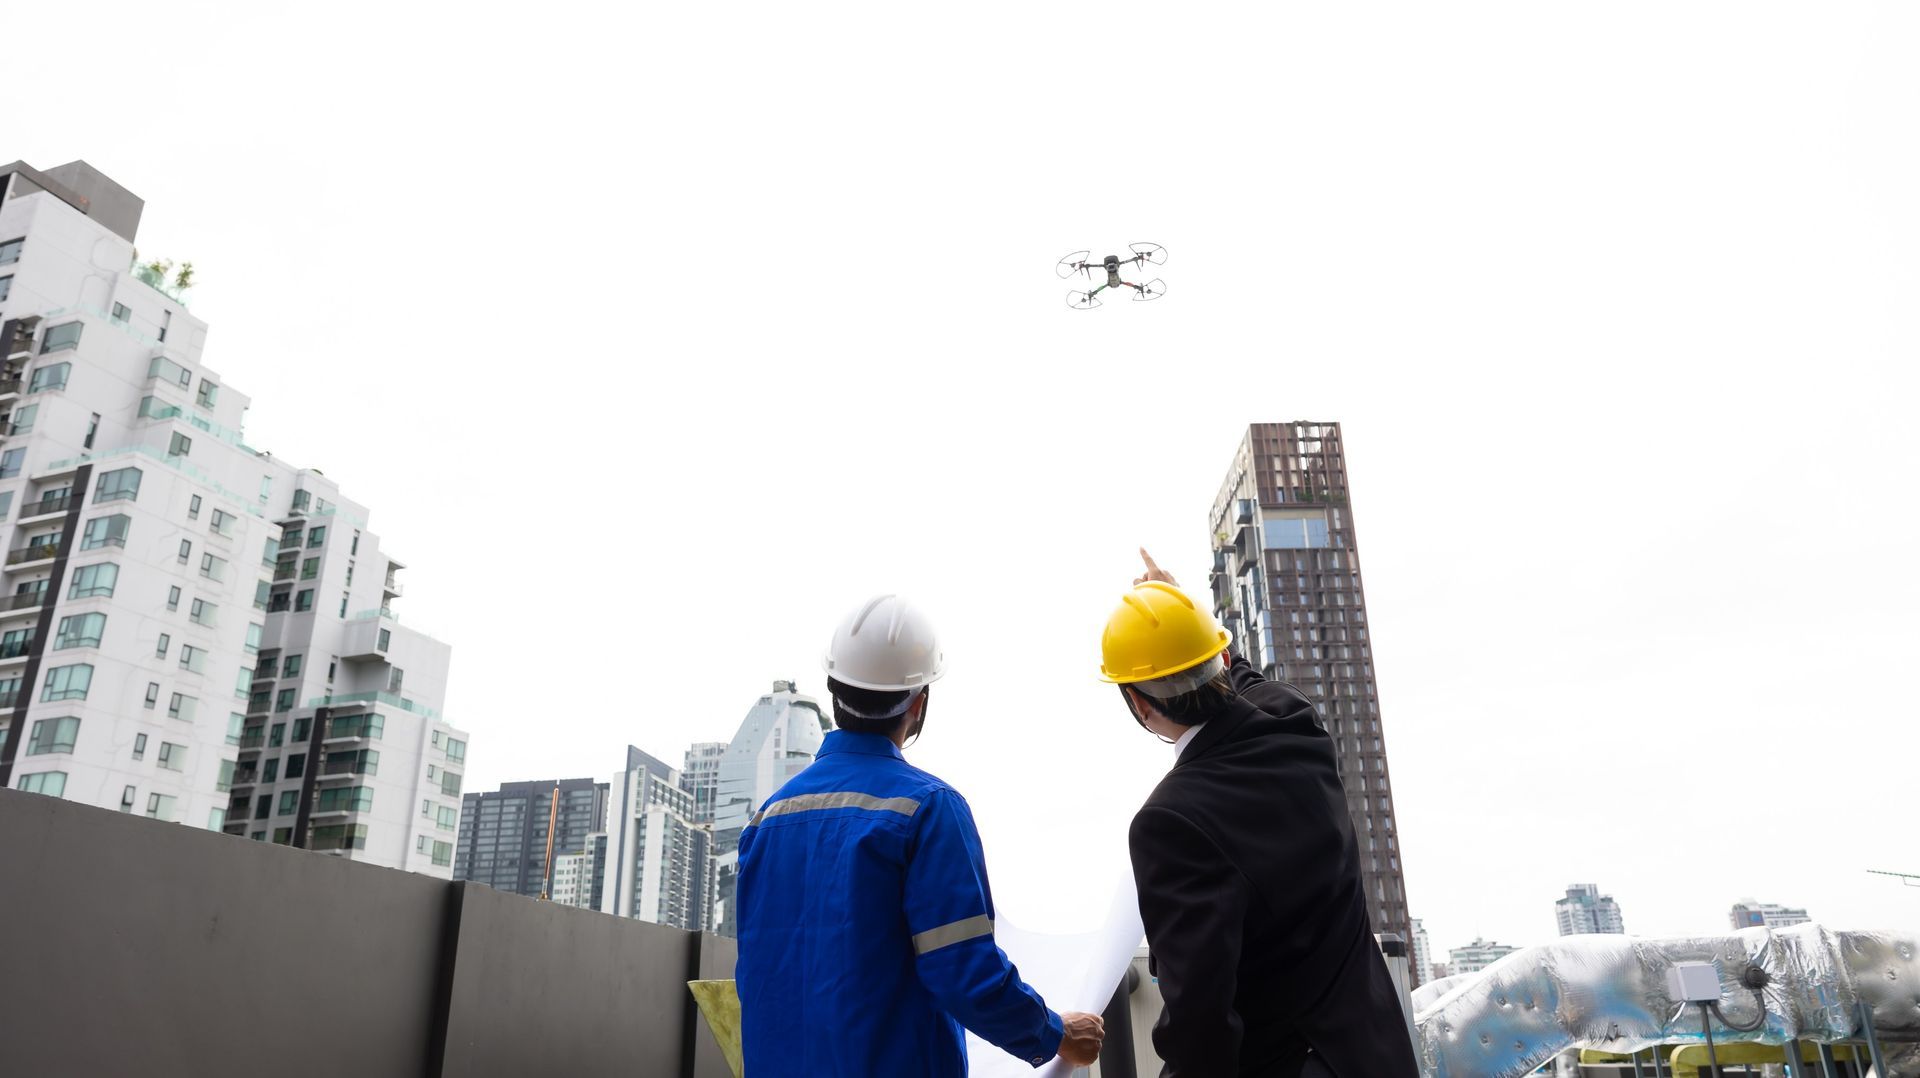 Professional inspection engineering use drone for survey building under construction site